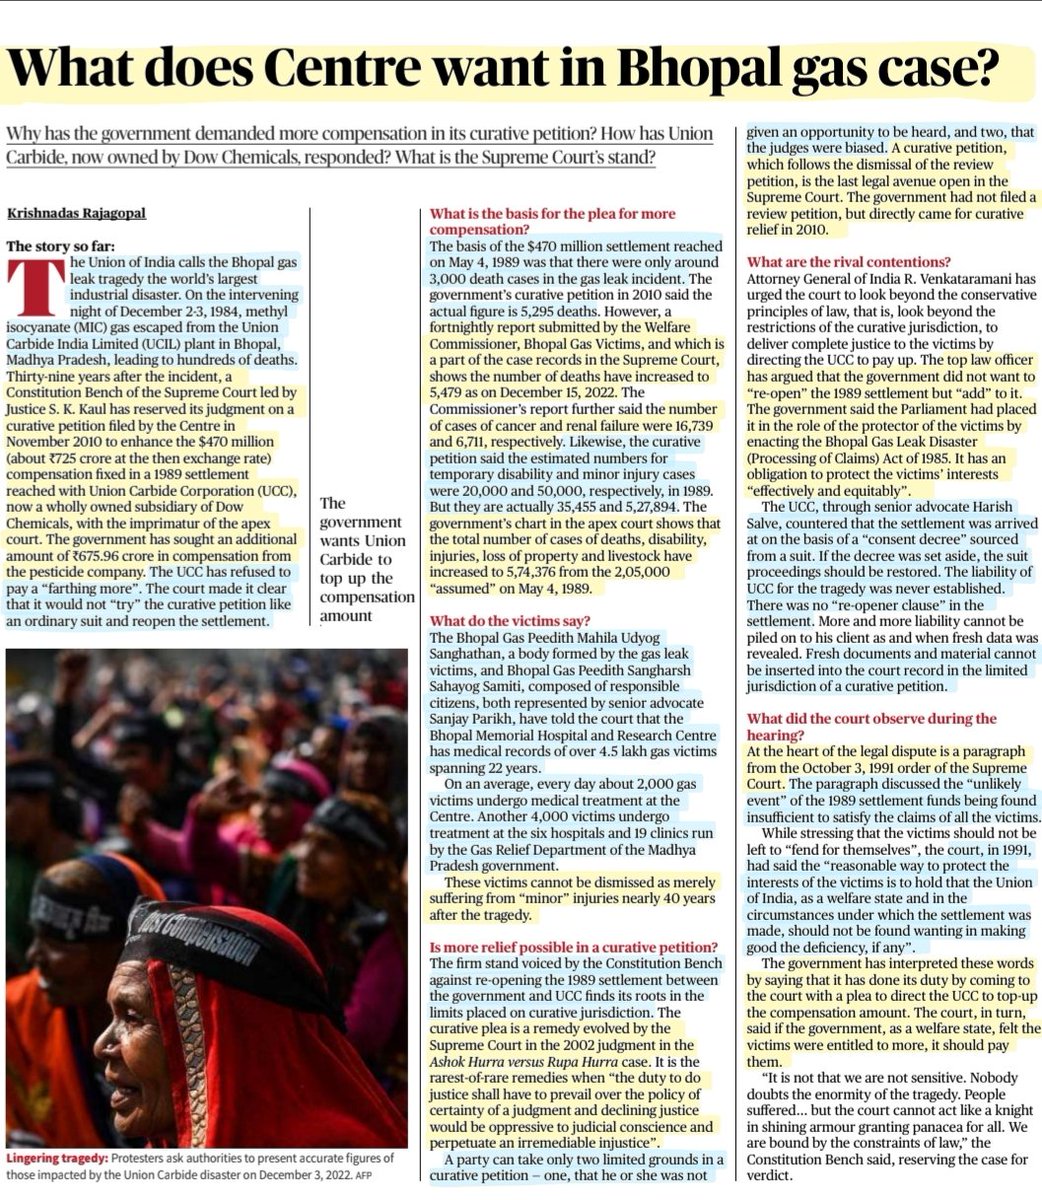 'What does Centre want in the Bhopal gas case?'

Well explained:Abt Gas Tragedy,impact,Victims numbers,
Chronology of events,compensation,Govt's demand,judgements &
More info..

#BhopalGasTragedy #Compensation #UnionCarbide #DowChemicals

#UPSC #UPSC2023 #upscprelims 

Source:TH